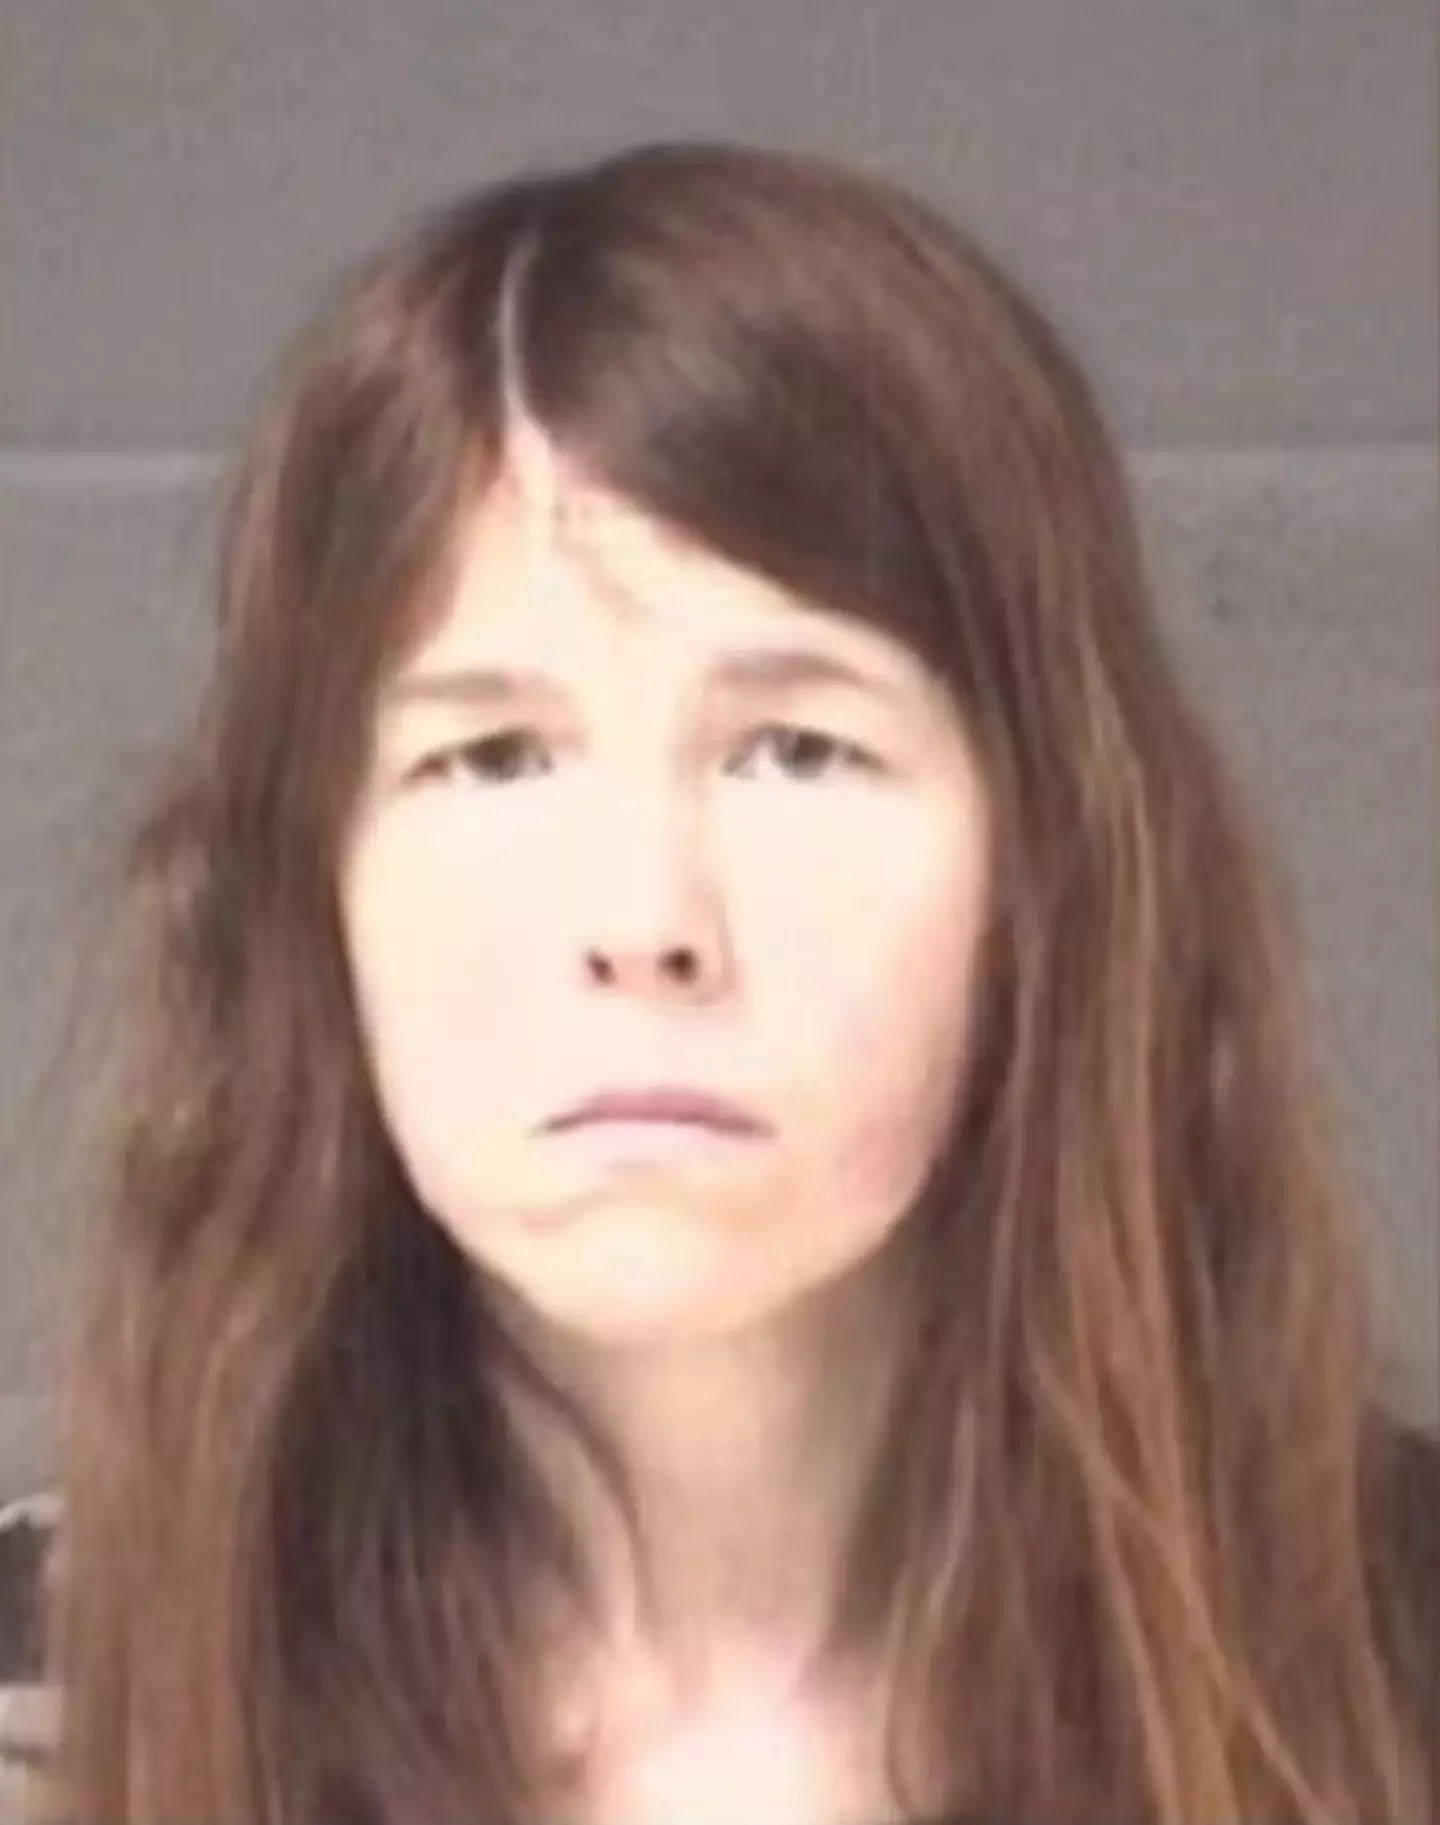 Kayla's mother Heather has been arrested and charged with one count of child abduction.